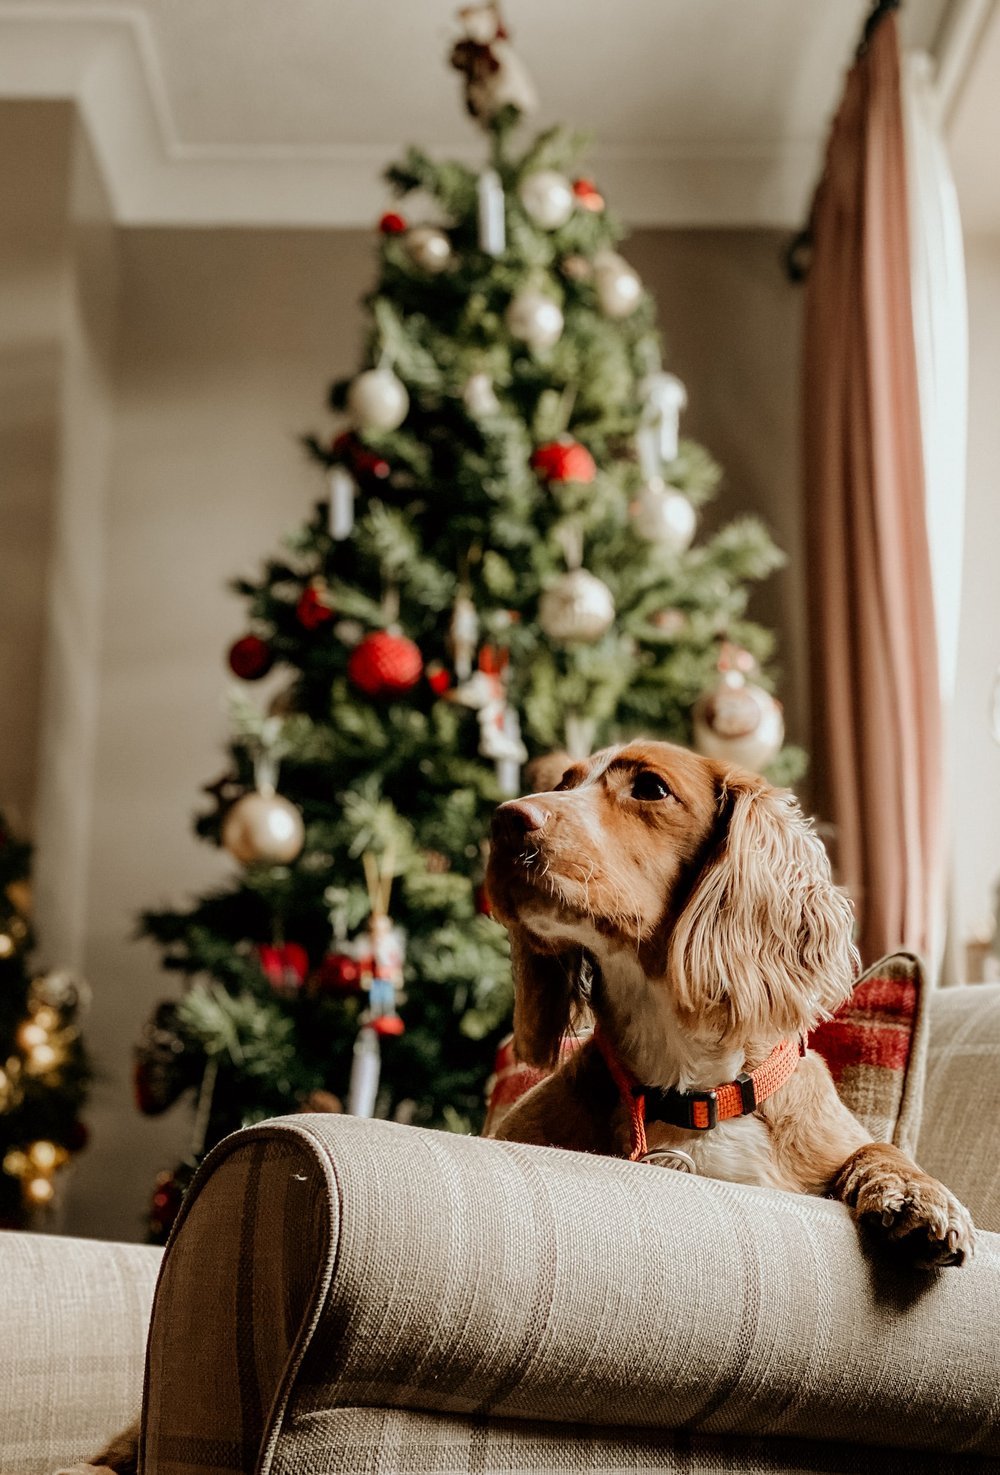 Are Christmas Trees Poisonous to Dogs?